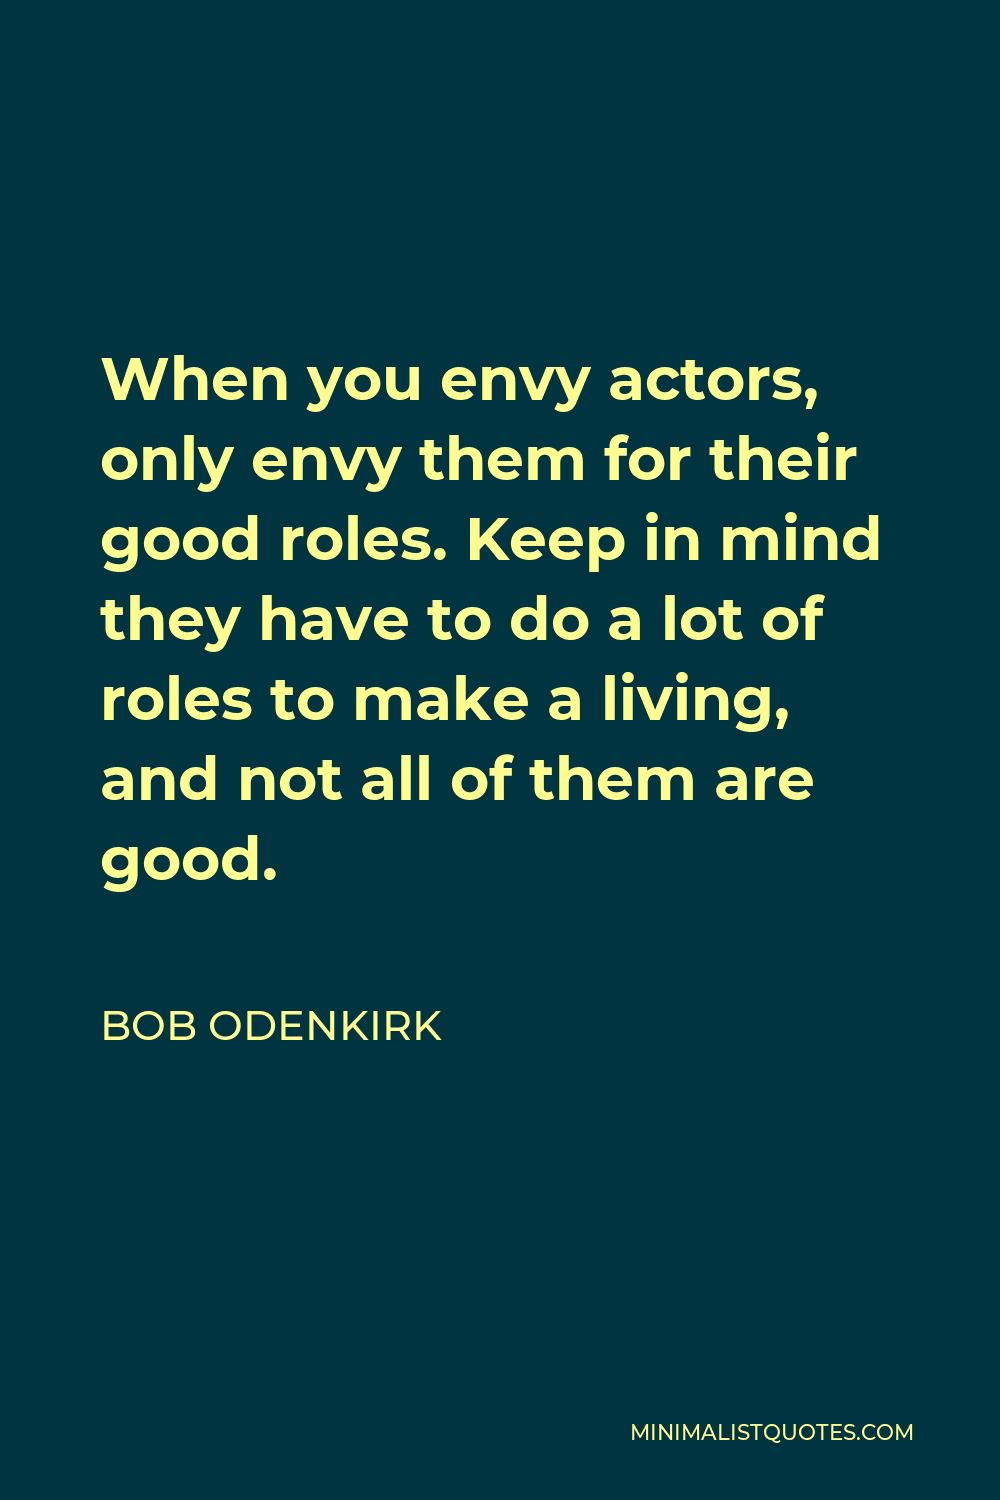 Bob Odenkirk Quote - When you envy actors, only envy them for their good roles. Keep in mind they have to do a lot of roles to make a living, and not all of them are good.